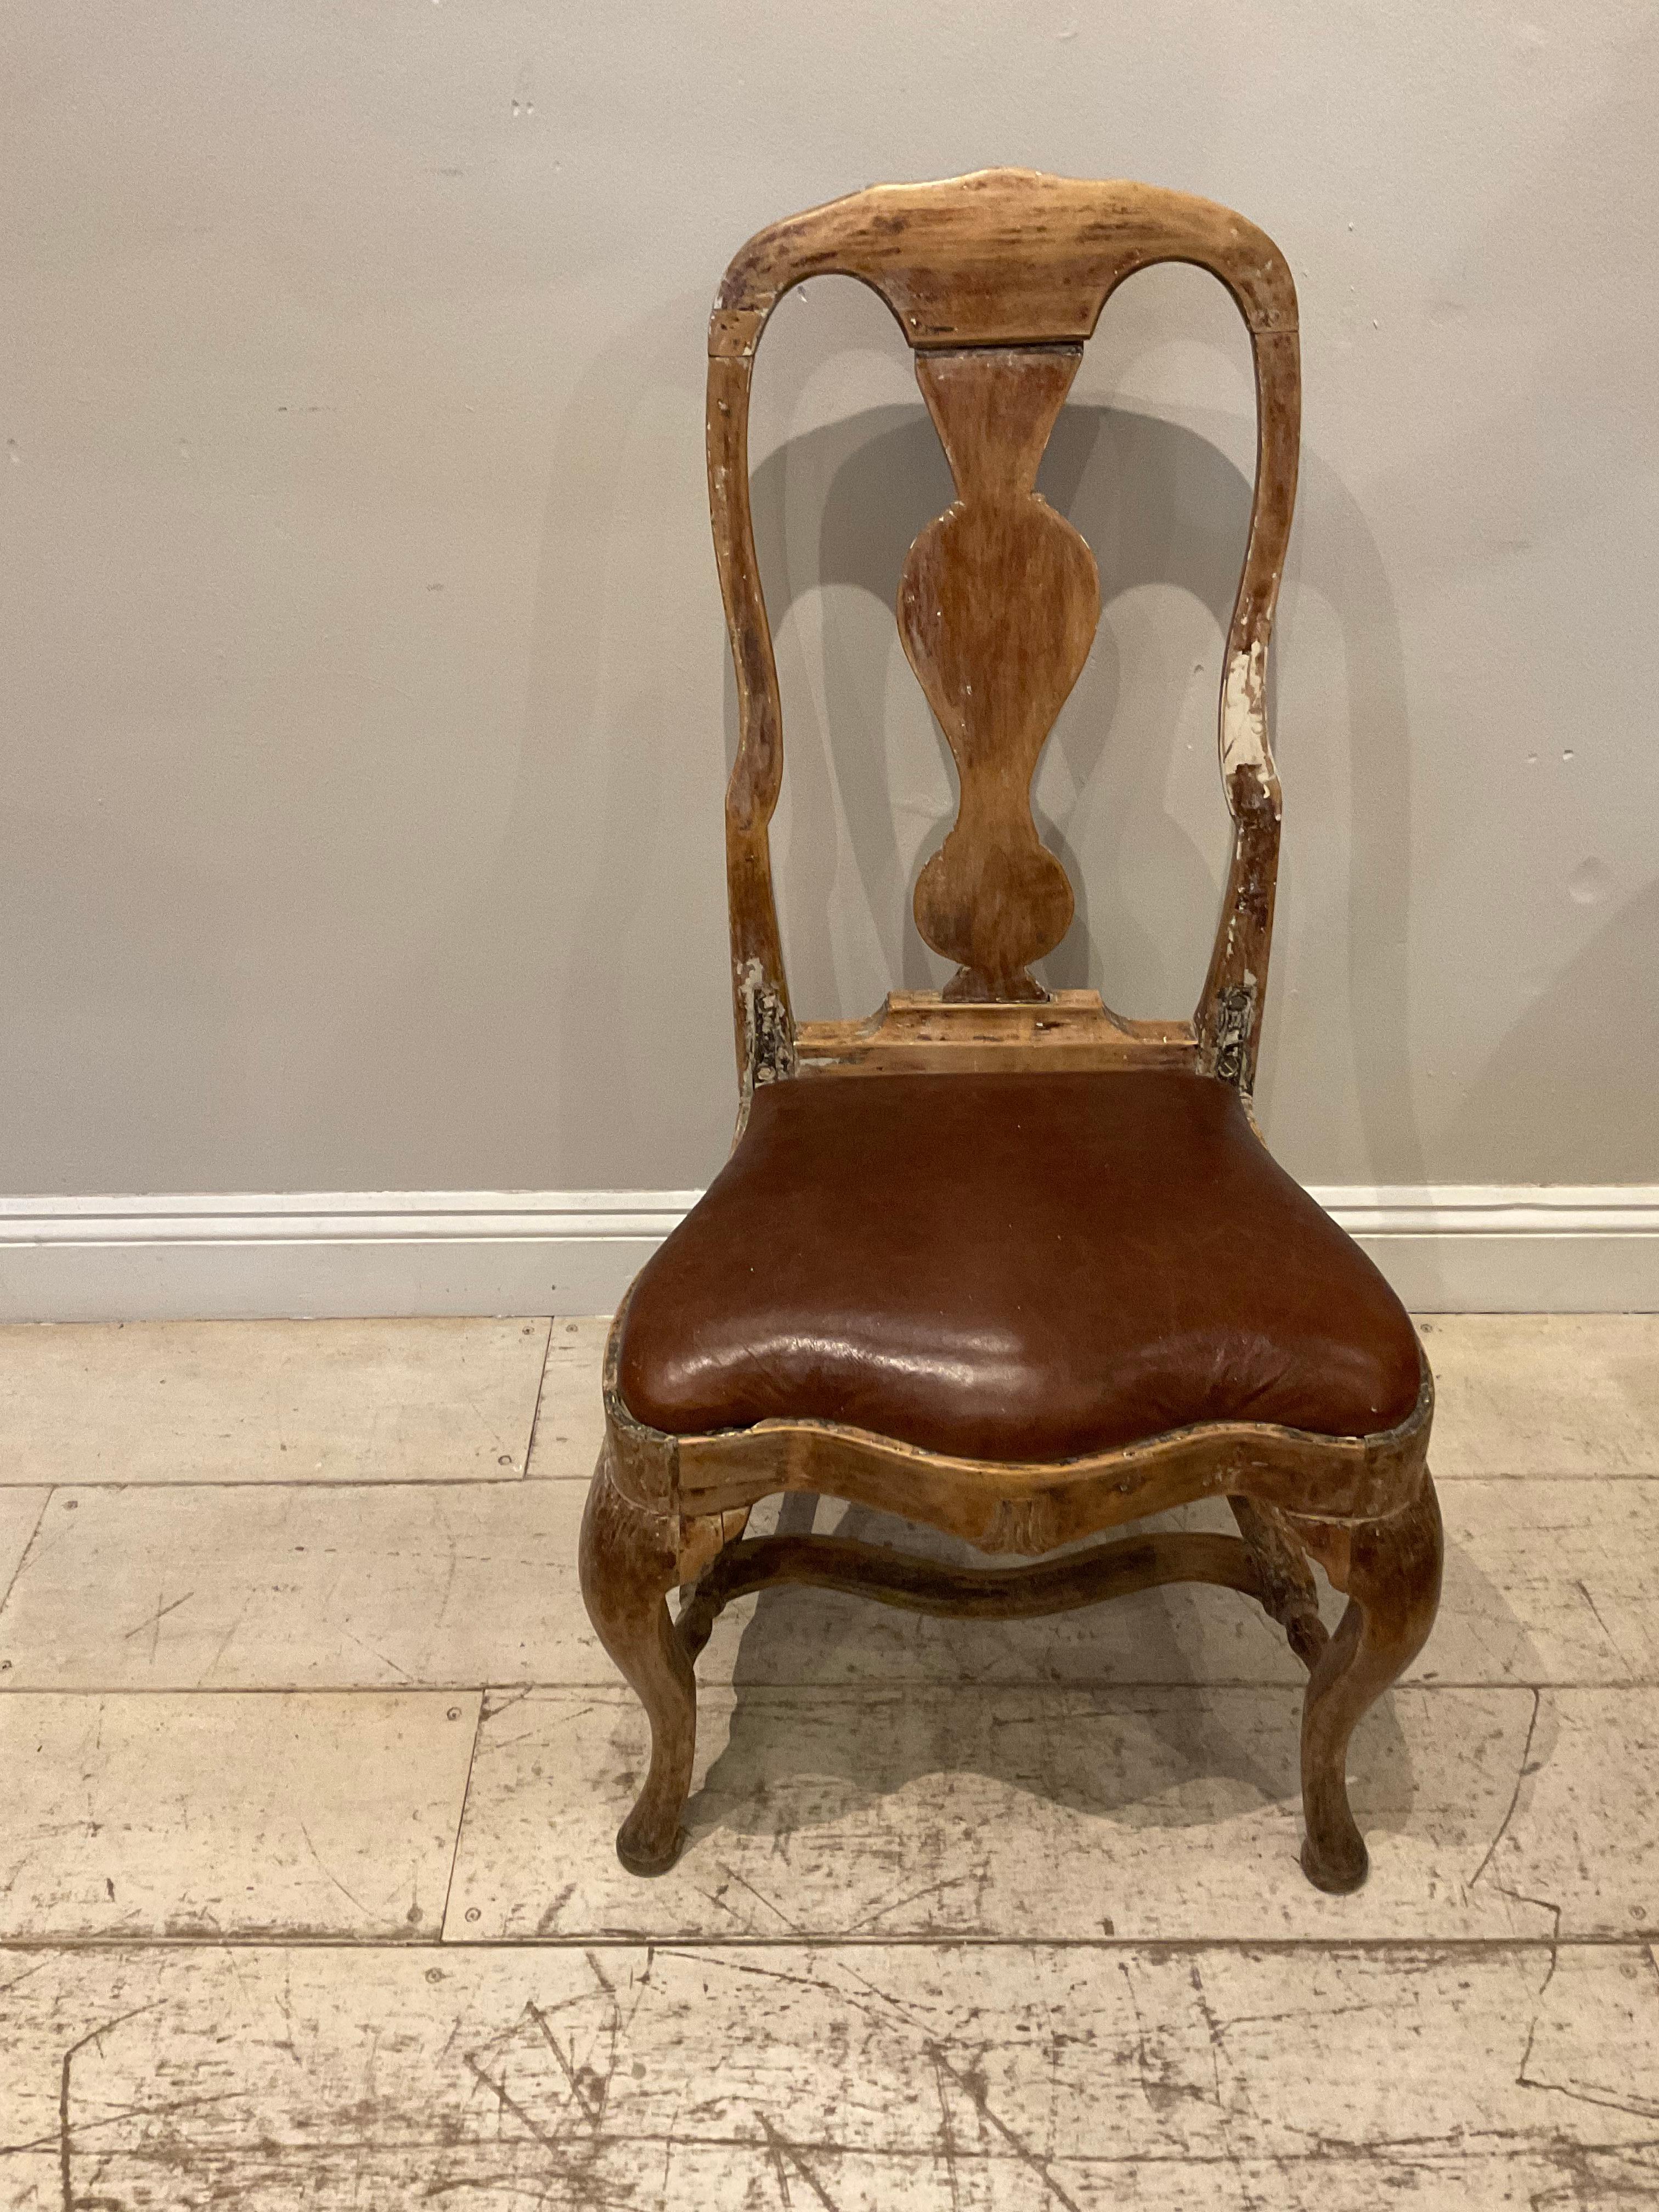 C18th Swedish rococo chair with leather seat.
A handsome single high backed chair circa 1760 which has a simple understated well-worn patina and a leather drop in seat that's been replaced over time.

Perfect for use as a desk chair or statement